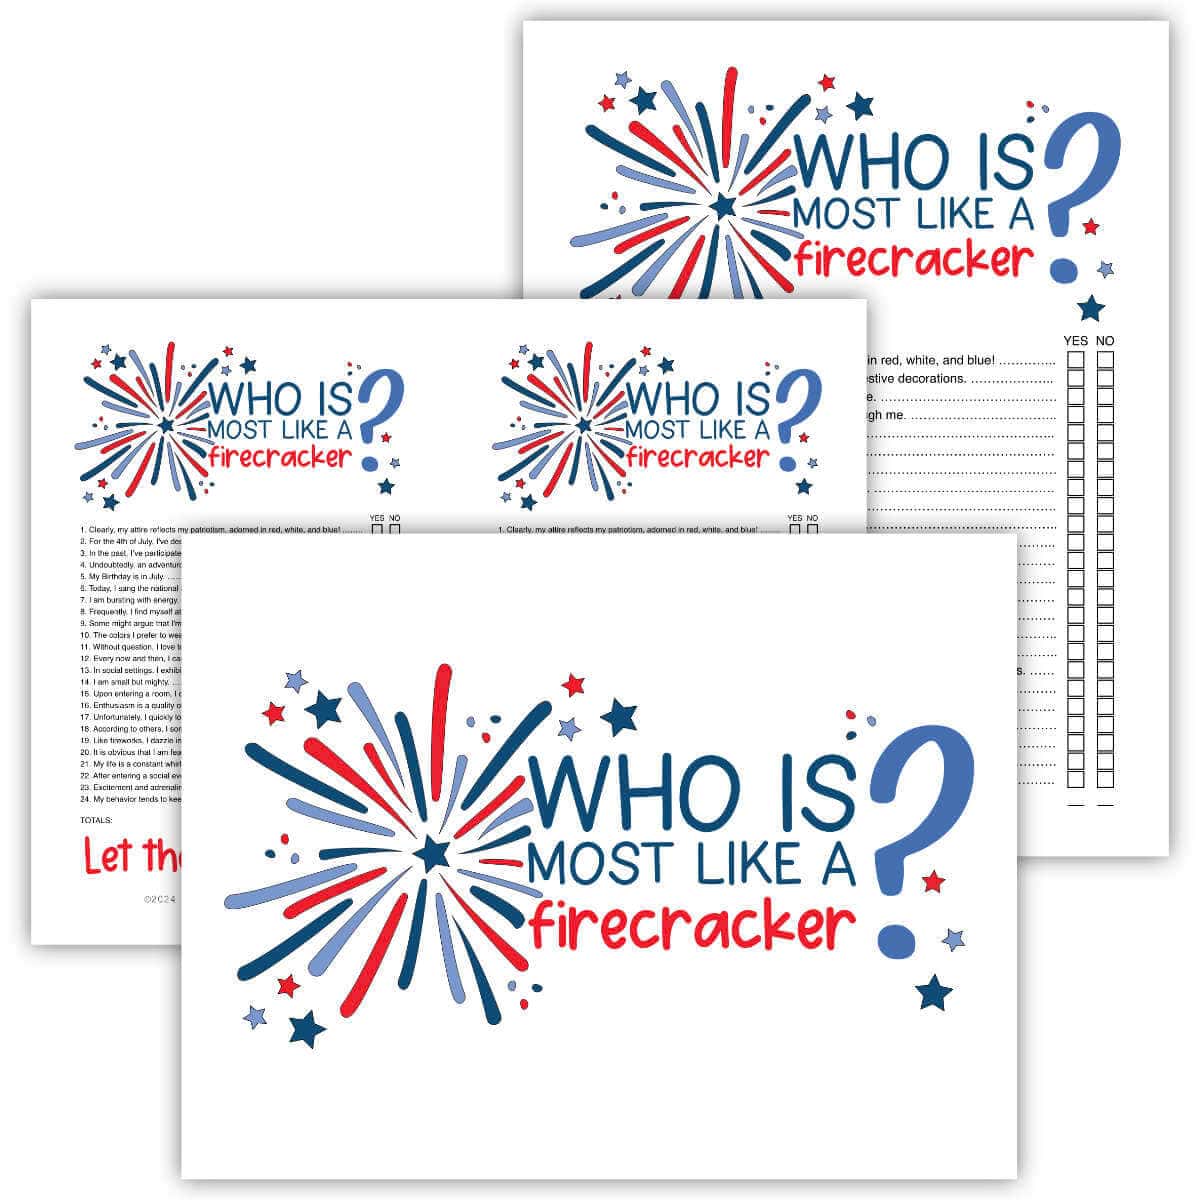 Who Is Most Like A Firecracker printable game pages in red, white, and blue.